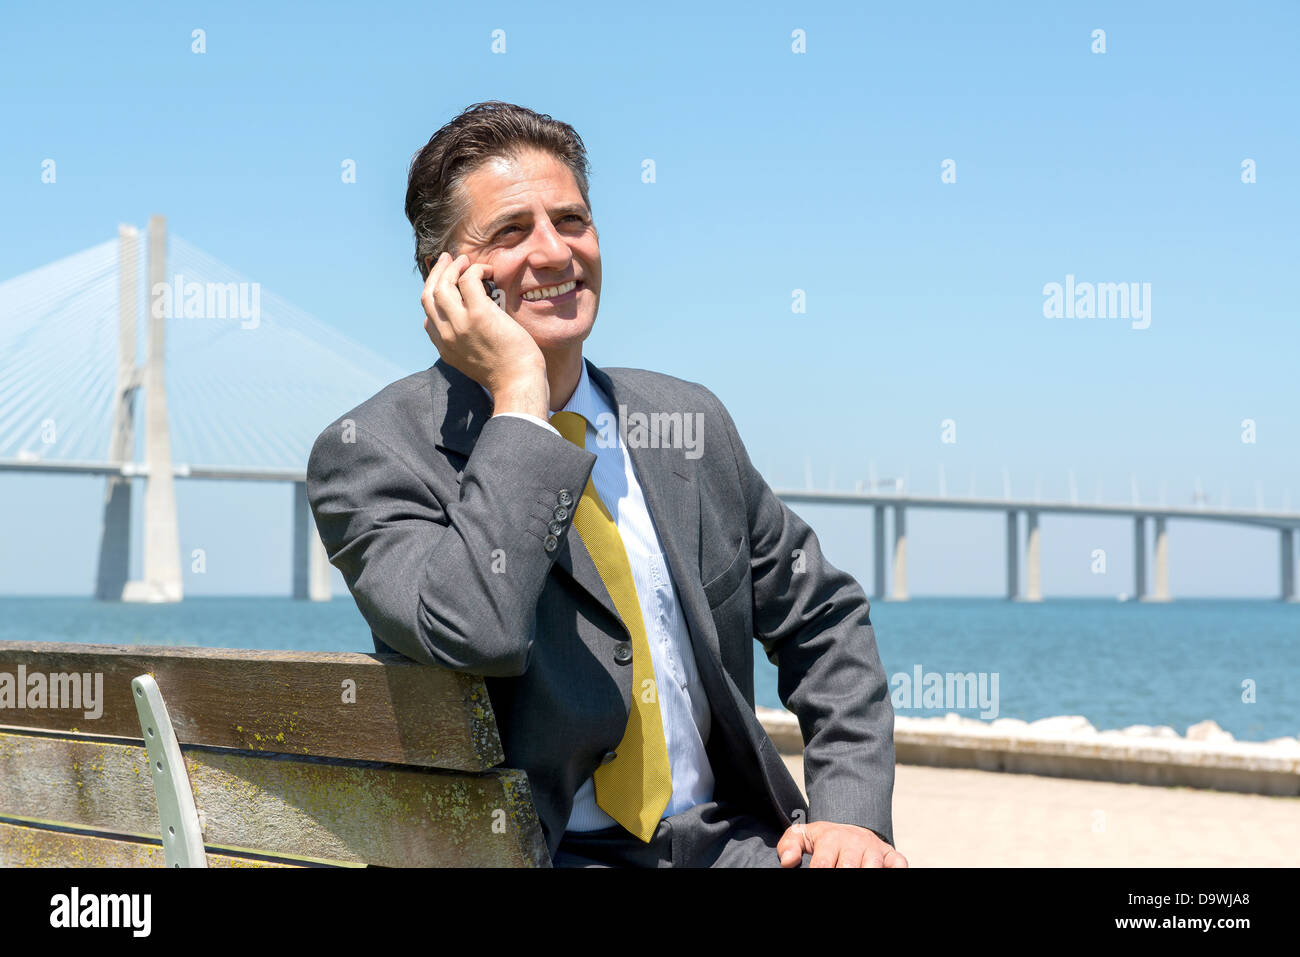 Businessman outdoors with cellphone Banque D'Images